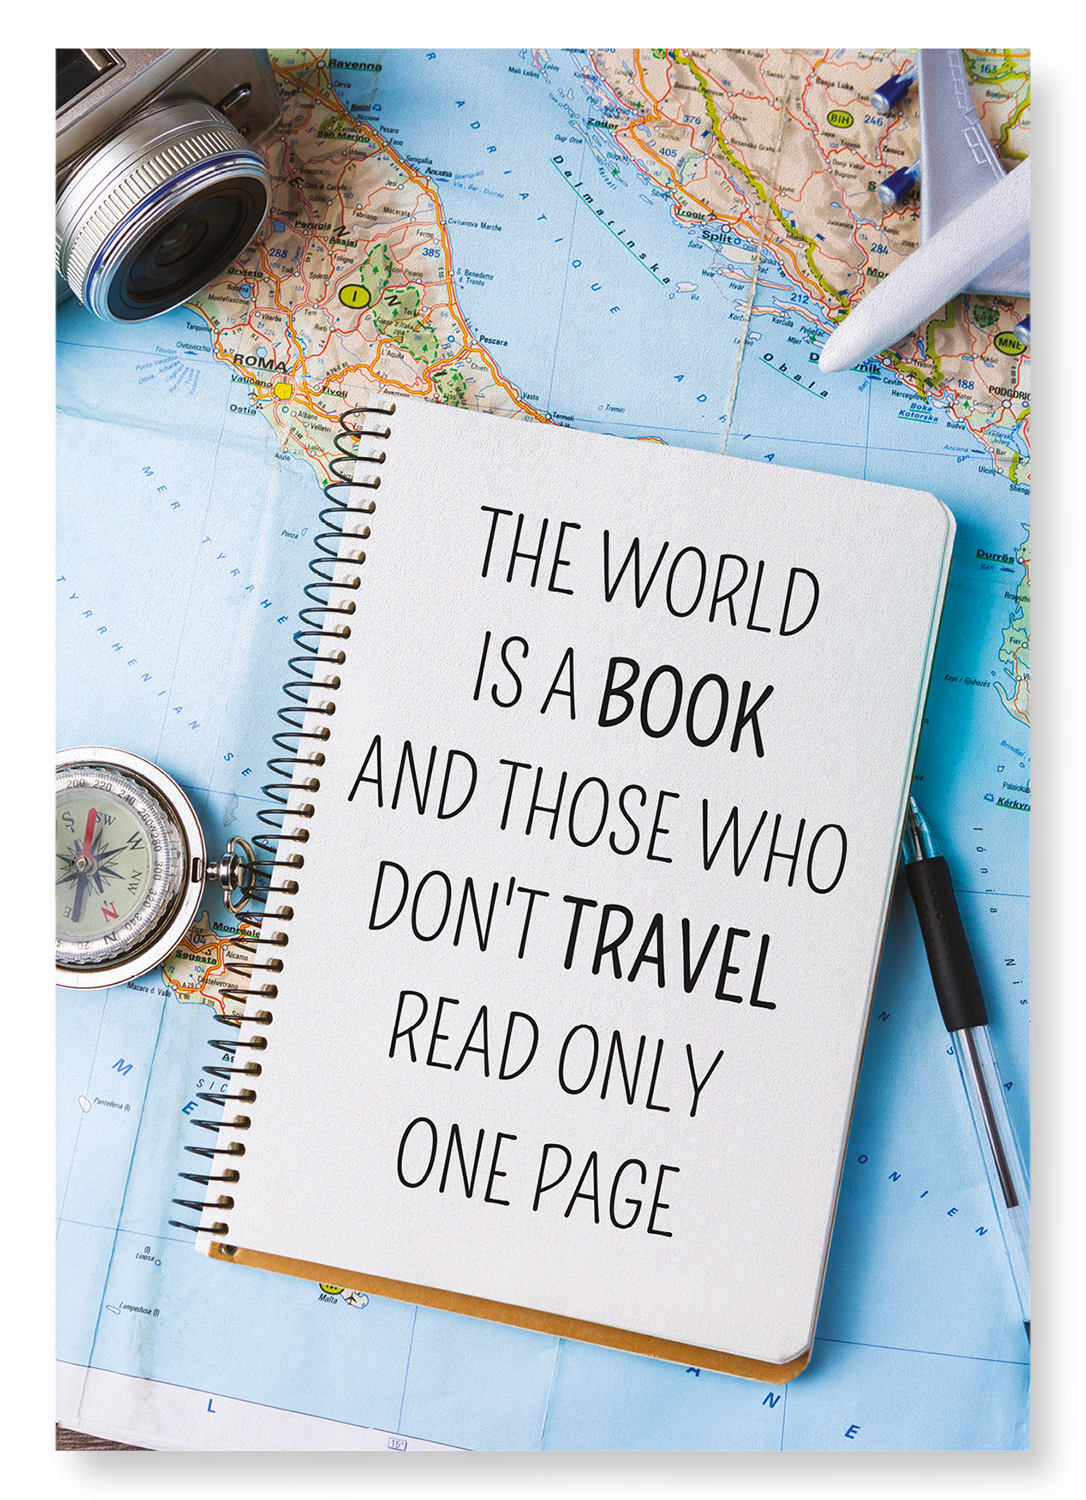 THE WORLD IS A BOOK: Photo Art print